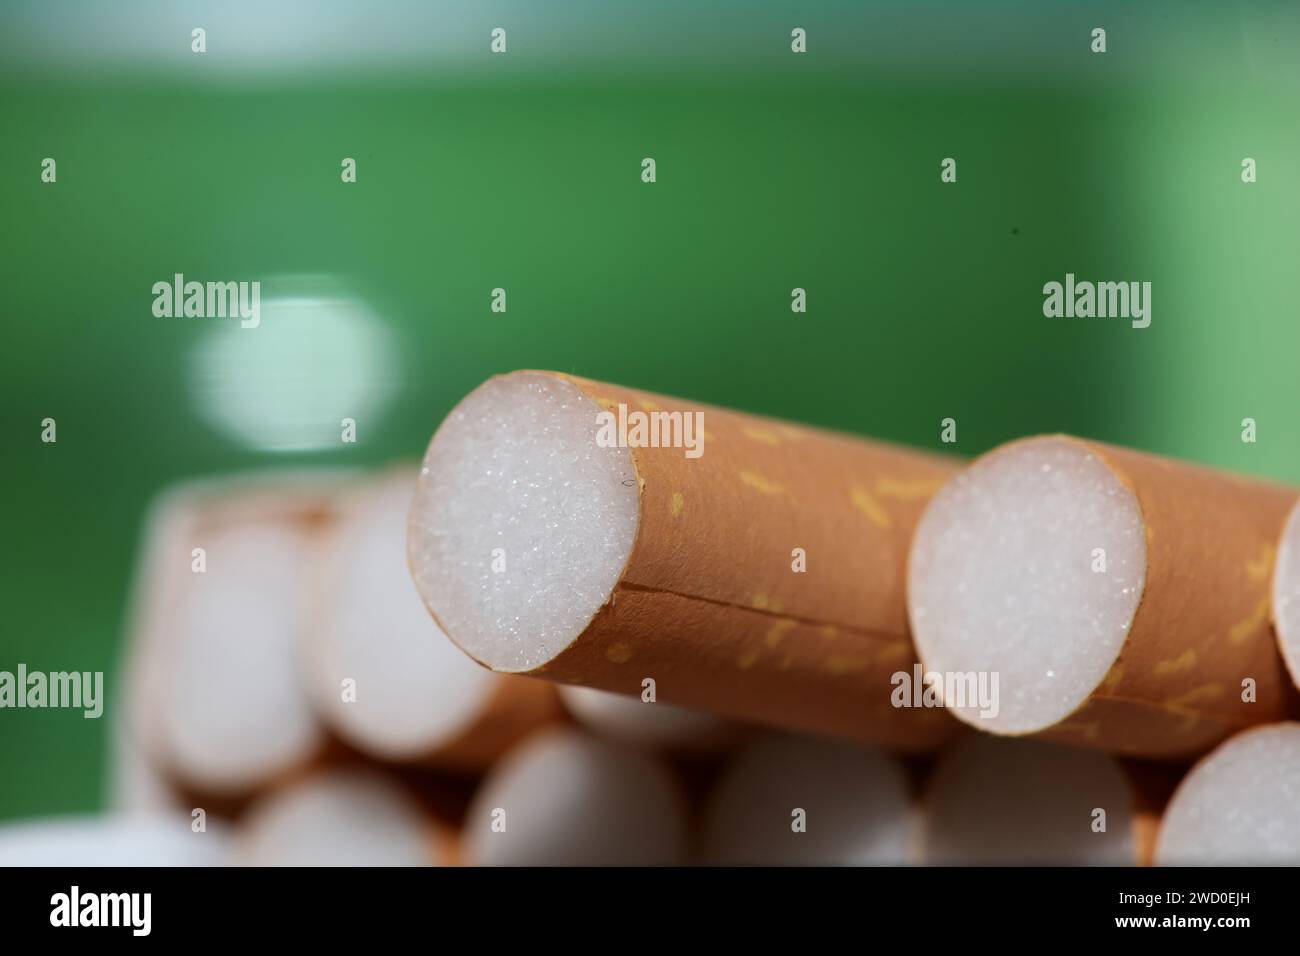 Number of cigarettes isolated tobacco danger close up quit smoking cessation cigaret bad habit nicotine junkie big size high quality instant prints Stock Photo